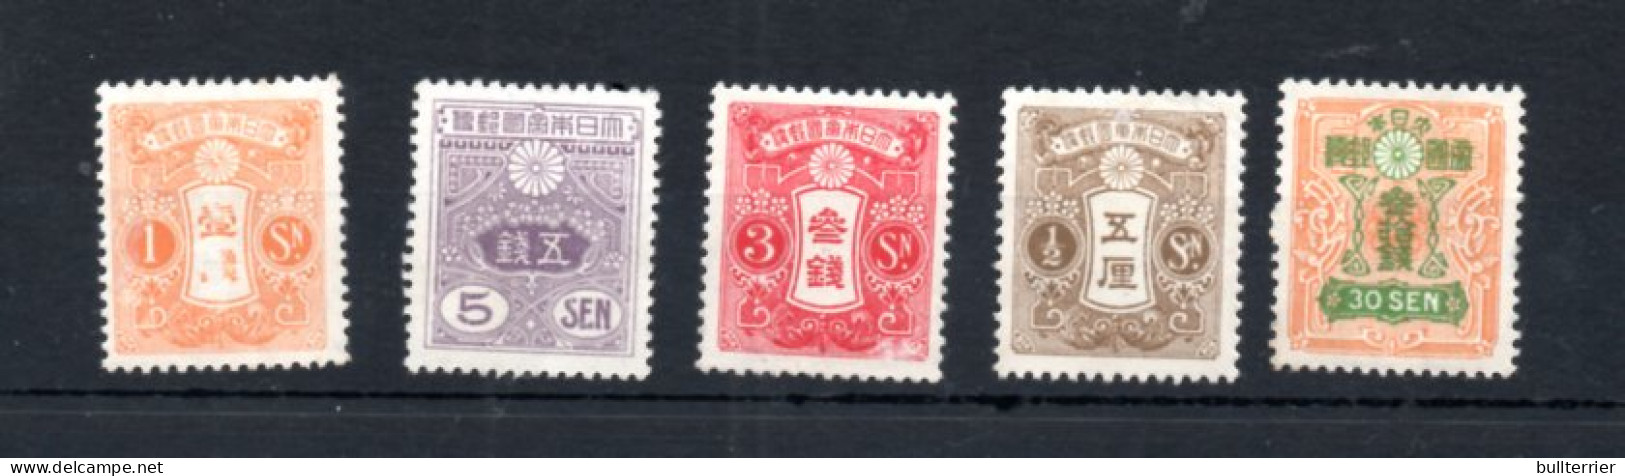 JAPAN - 1914 - 1//2, 1,3, 5 AND 30SEN VALUES  MINT NEVER HINGED SOME GUM SPECKS  SG CAT £65,  - Neufs